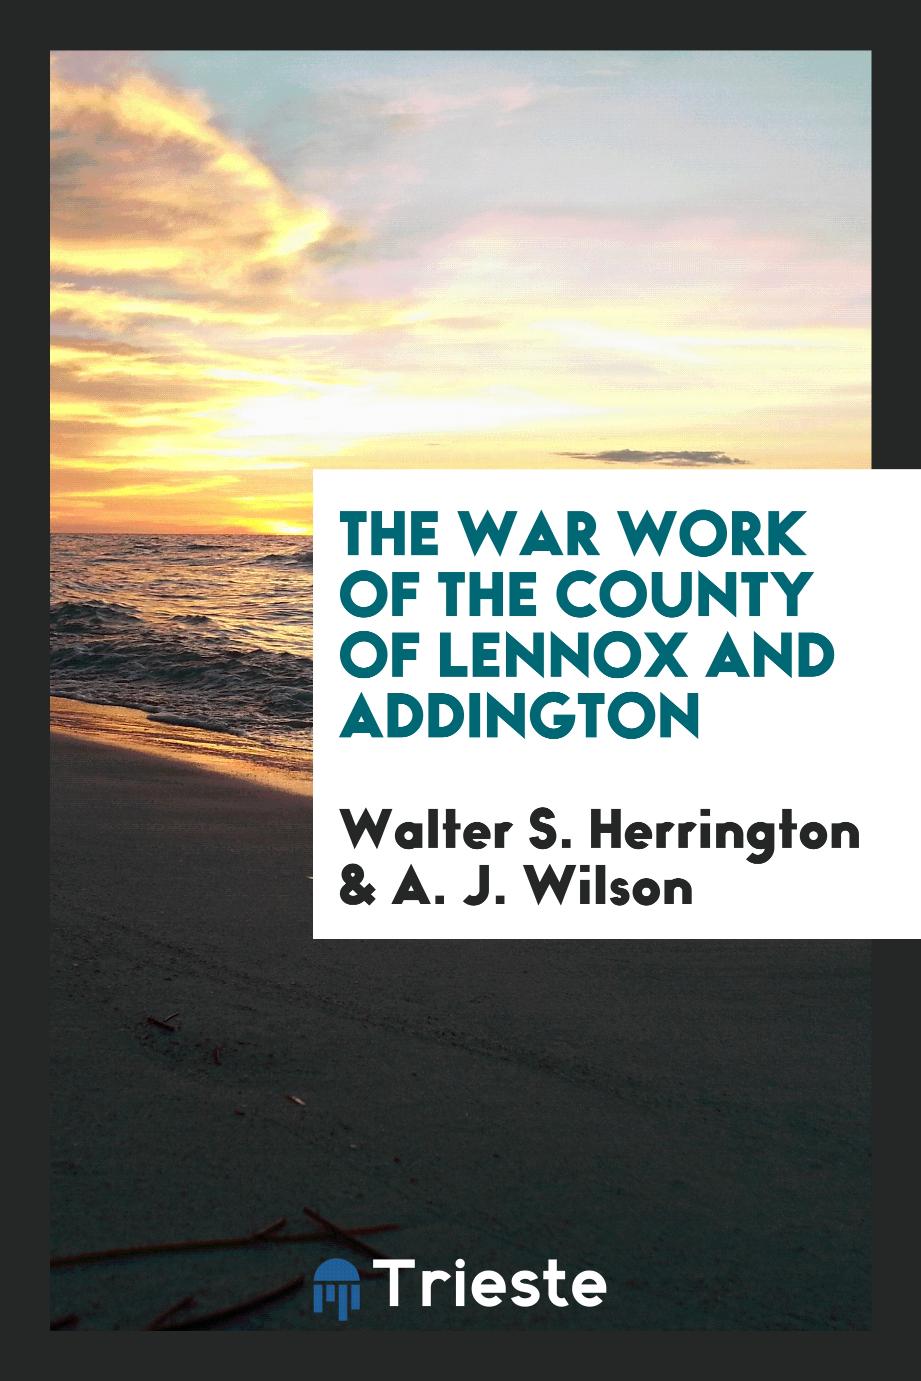 The war work of the county of Lennox and Addington